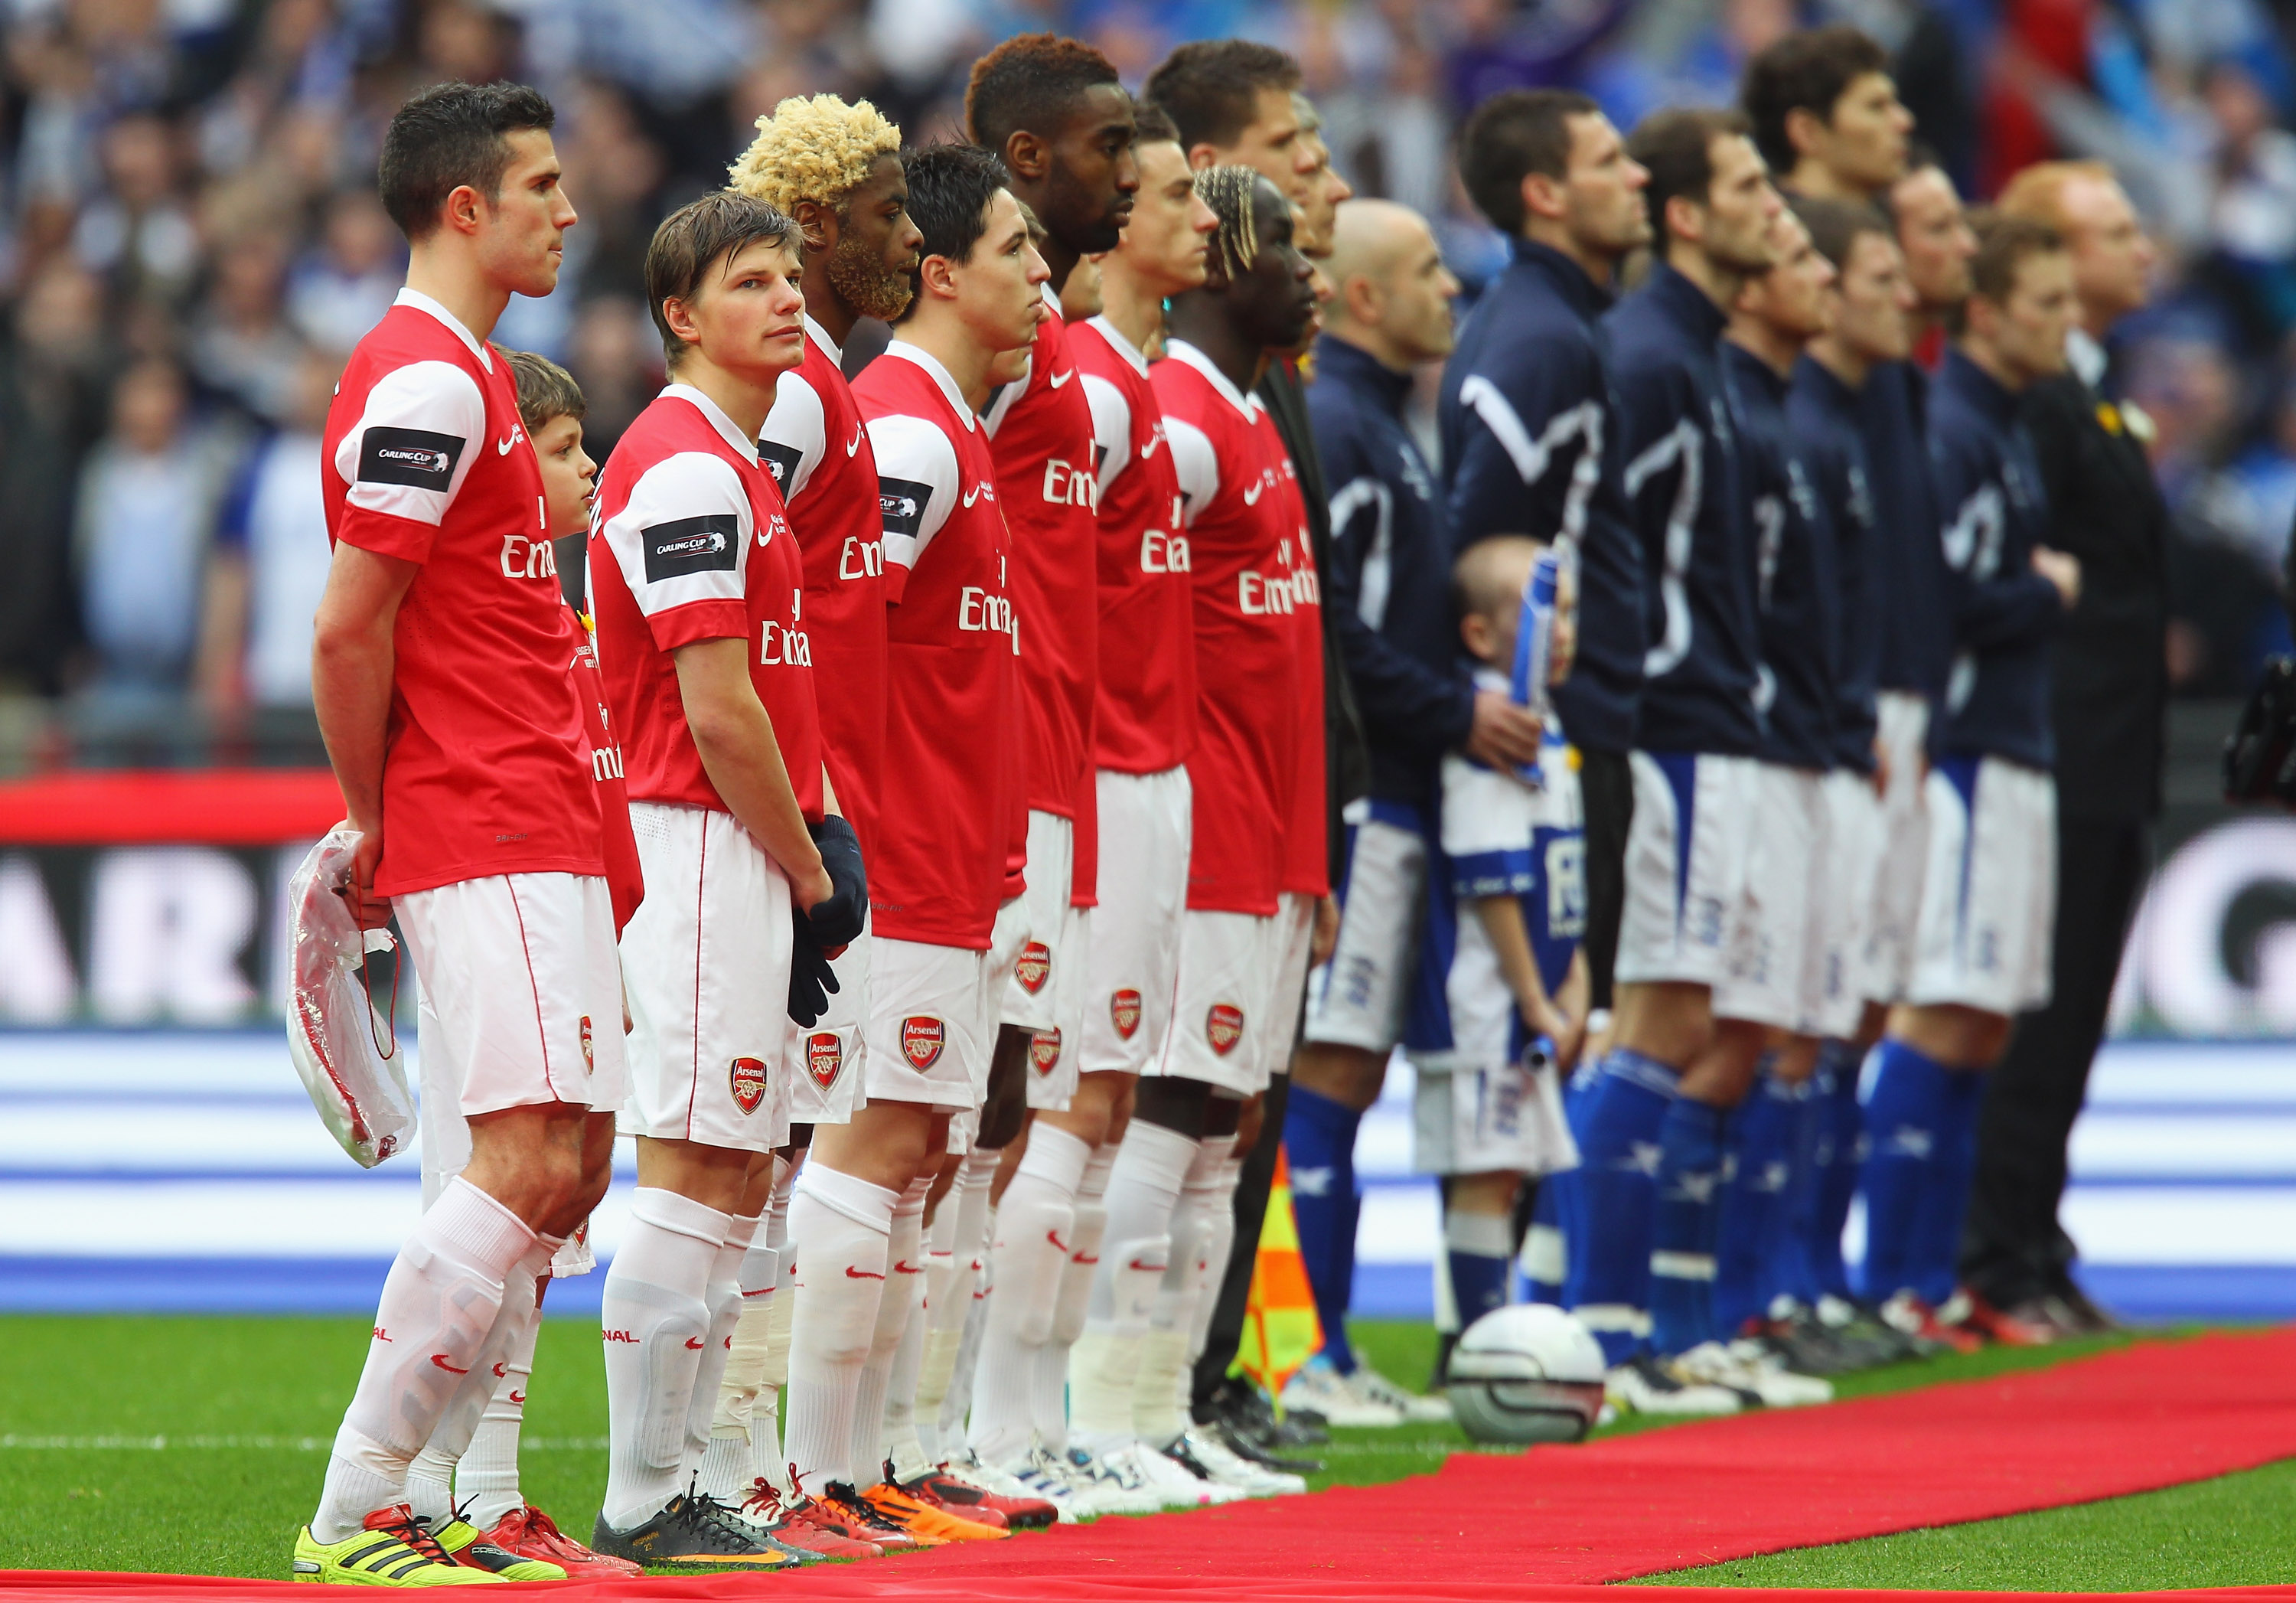 LONDON, ENGLAND - FEBRUARY 27: Andrey Arshavin of Arsenal looks on as the teams line up ahead of the Carling Cup Final between Arsenal and Birmingham City at Wembley Stadium on February 27, 2011 in London, England.  (Photo by Alex Livesey/Getty Images)